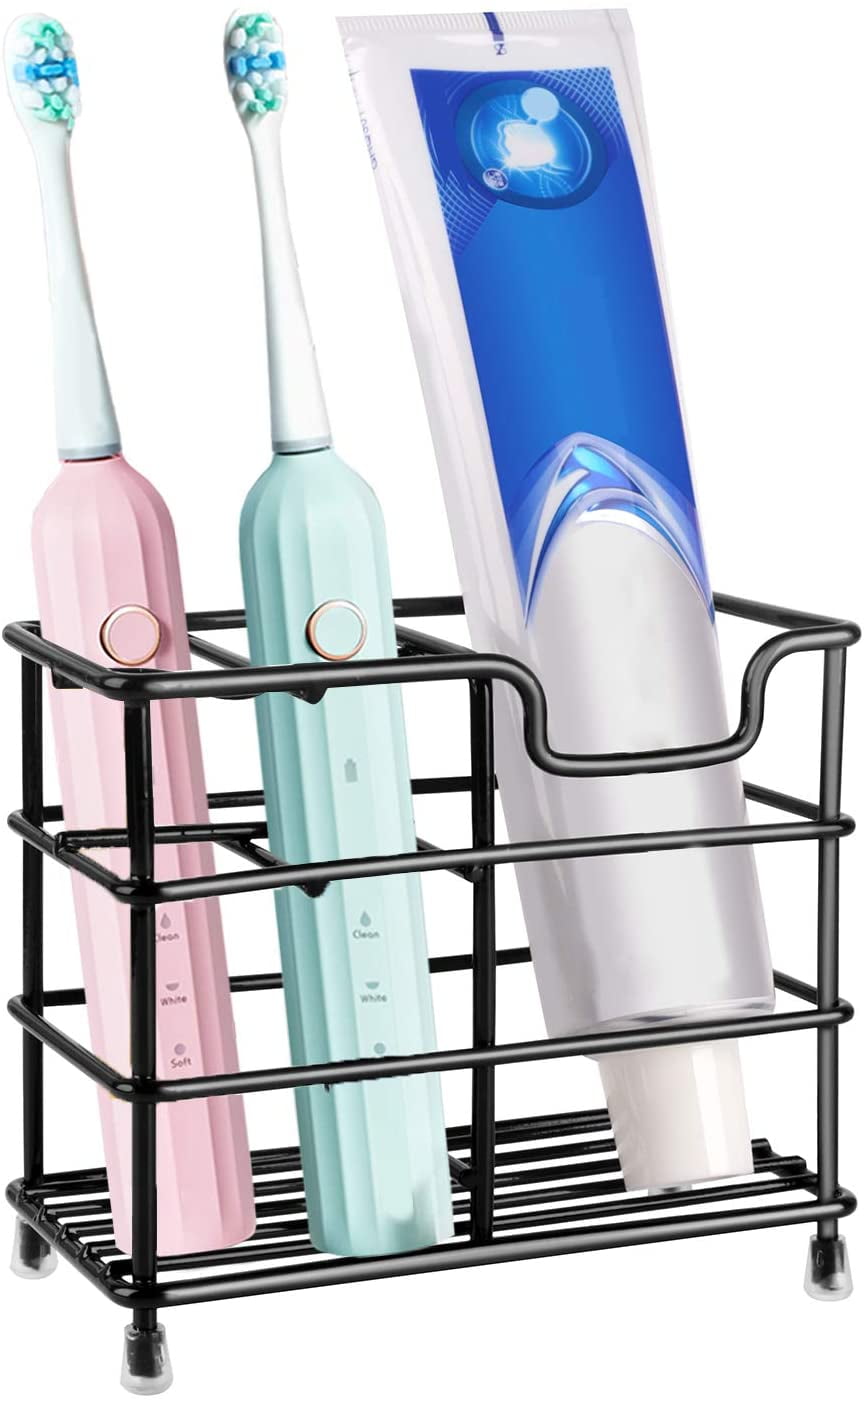 Wall Mounted Stainless Steel Bathroom Toothbrush and Toothpaste Holder 